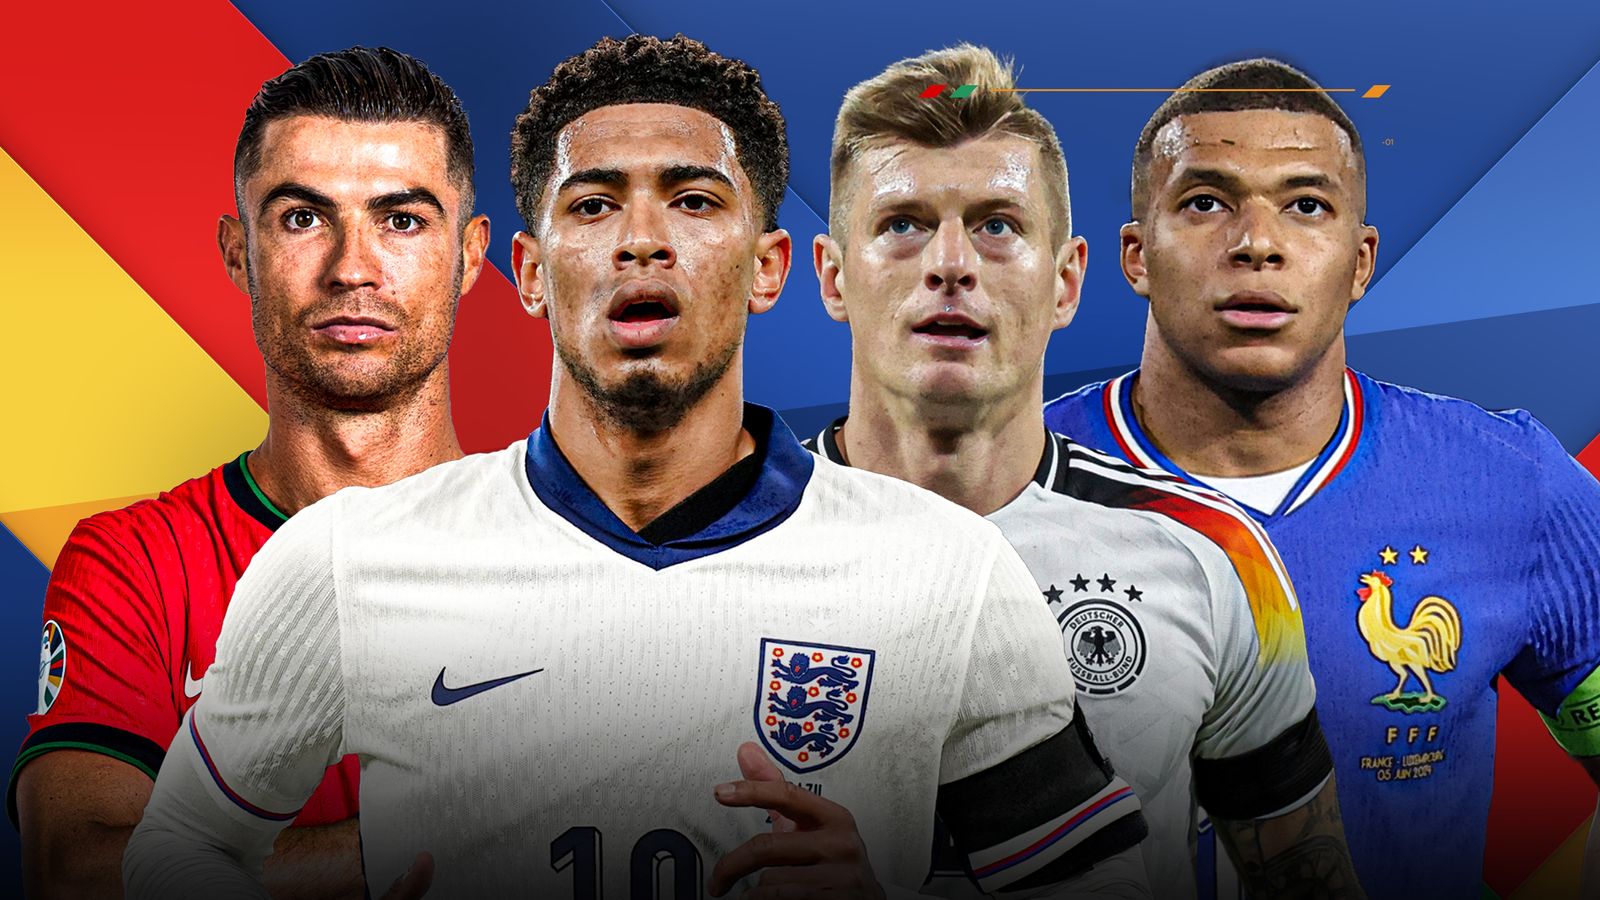 Euro 2024 favourites analysed: Kylian Mbappe primed to shine for France, Bruno Fernandes more important than Cristiano Ronaldo for Portugal